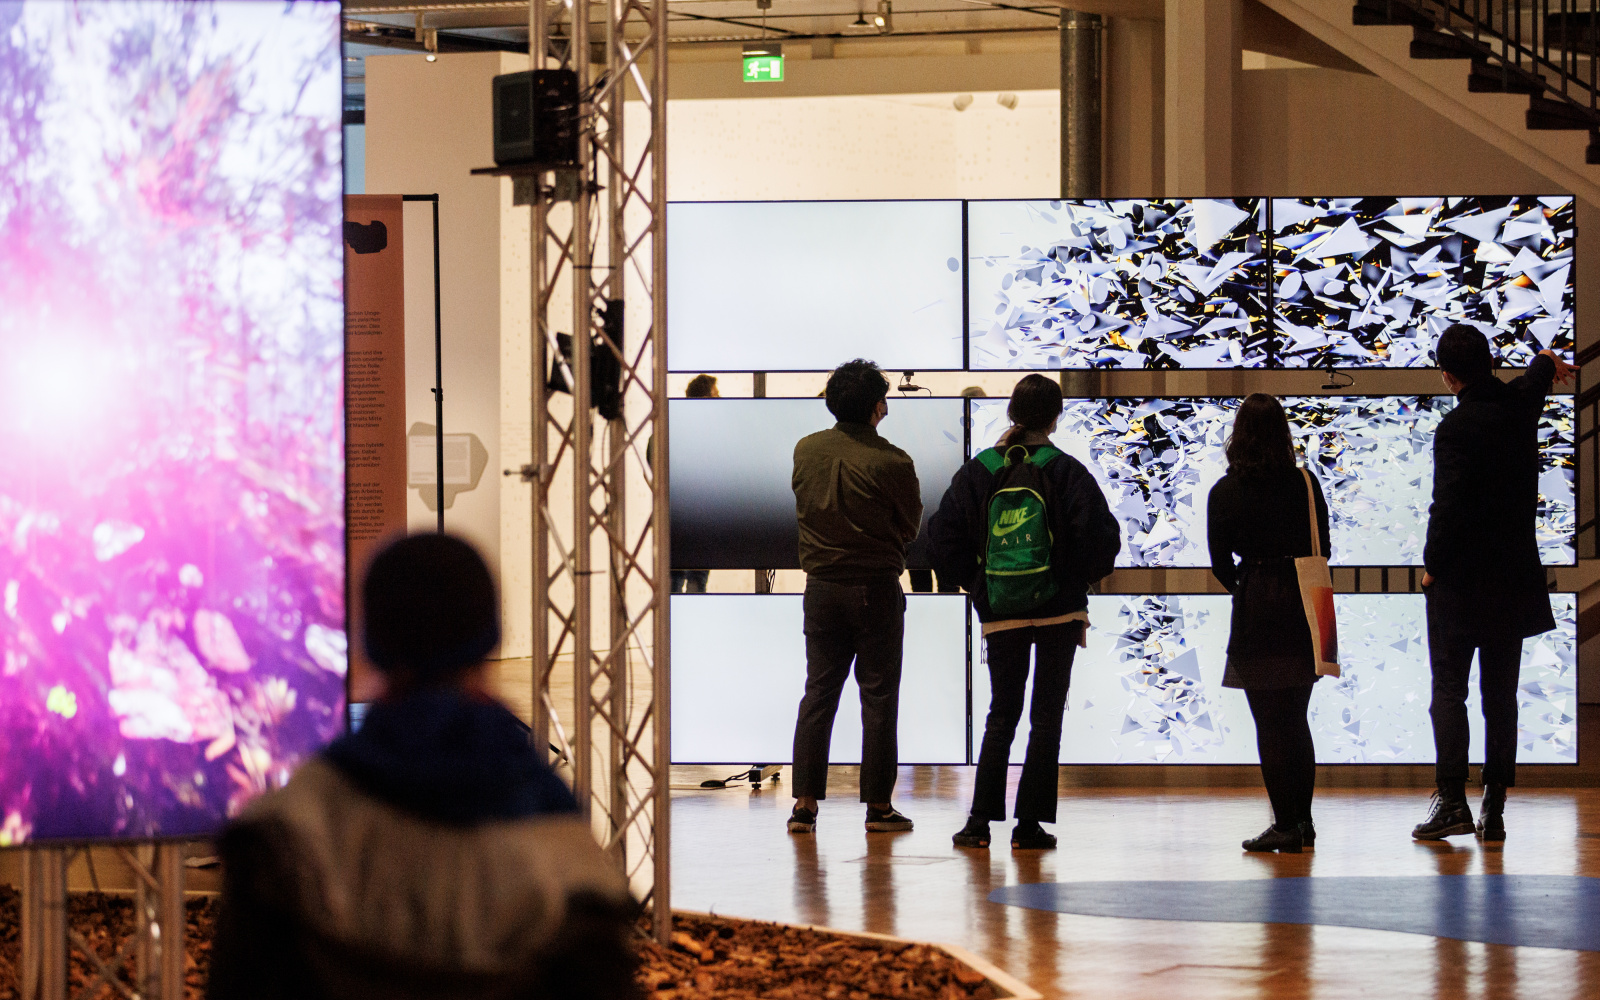 Random International, »Algorithmic Swarm Study (Triptych) / ll«, 2021. The picture shows people in front of a large screen in the BioMedia exhibition.